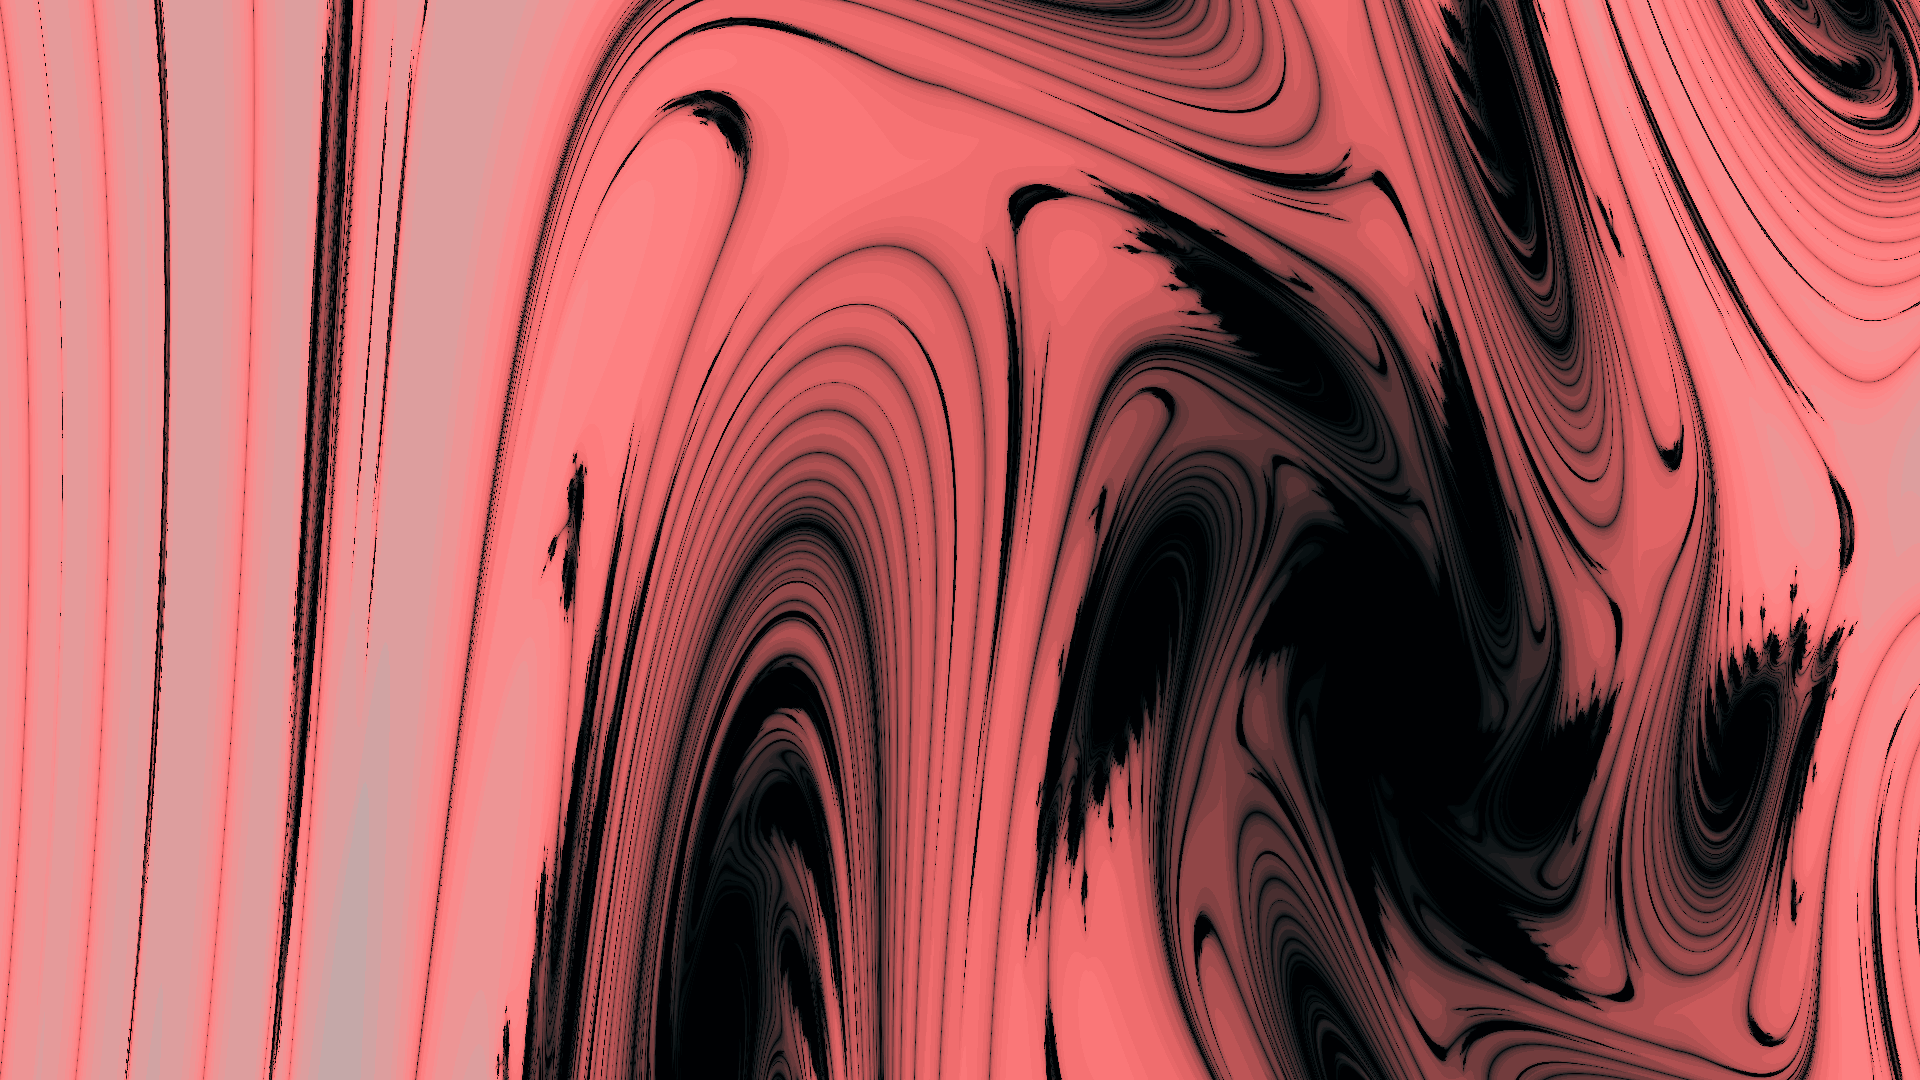 Abstract Fractal Pink 1920x1080